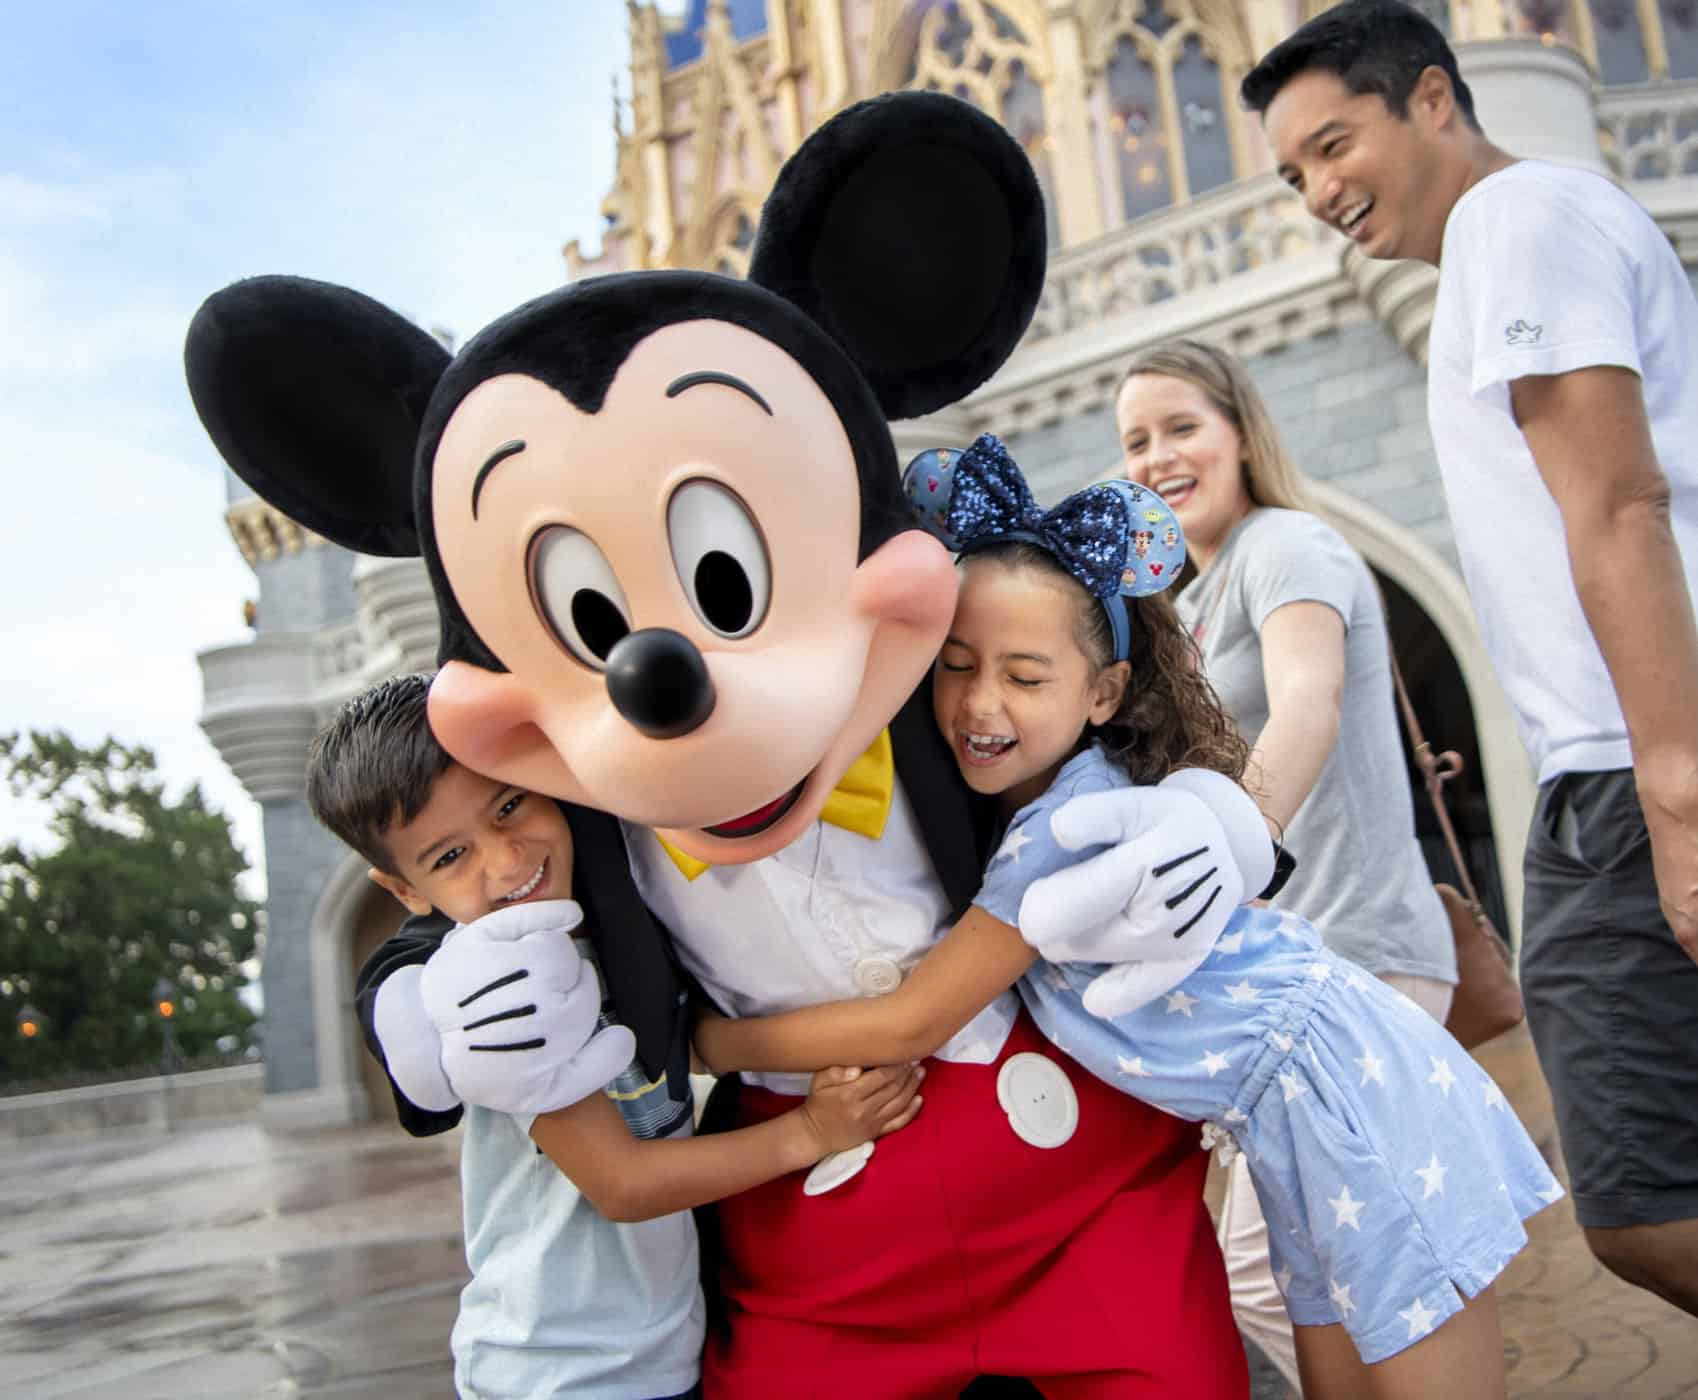 Kids hugging Mickey Mouse character during a family Disney vacation